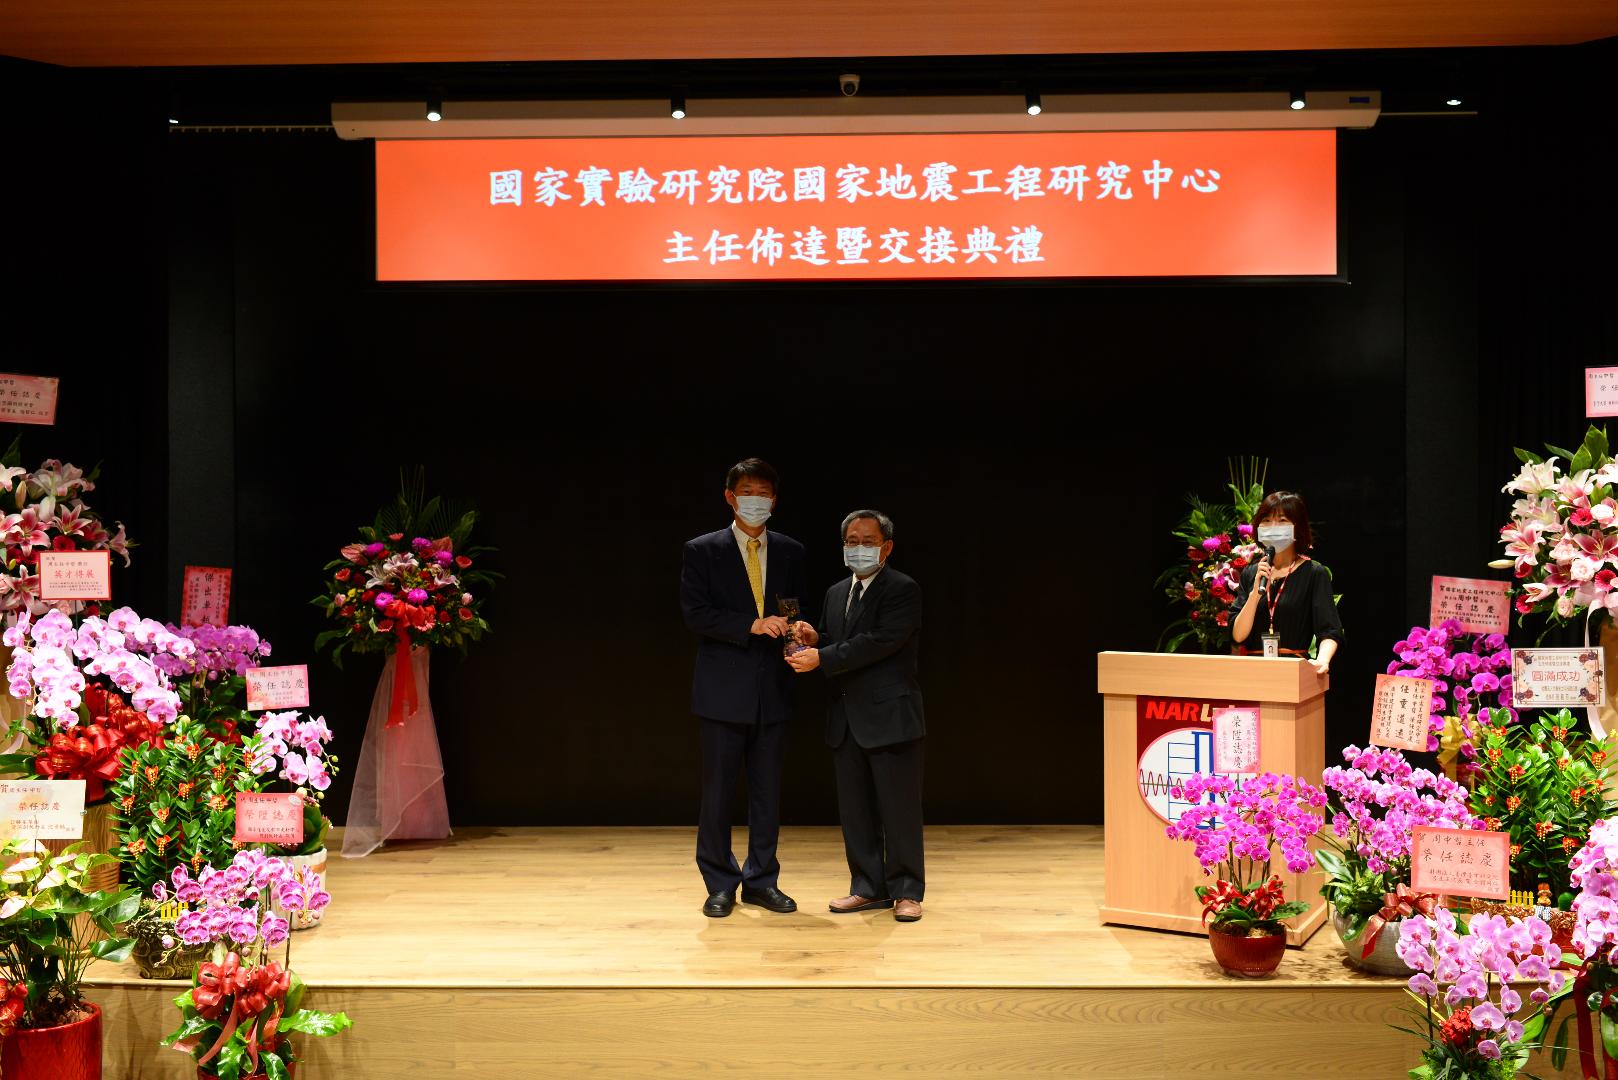 On May 17, 2021, NARLabs held the ceremony for handing over the directorship of the National Center for Research on Earthquake Engineering (NCREE) to Dr. Chung-Che Chou. 